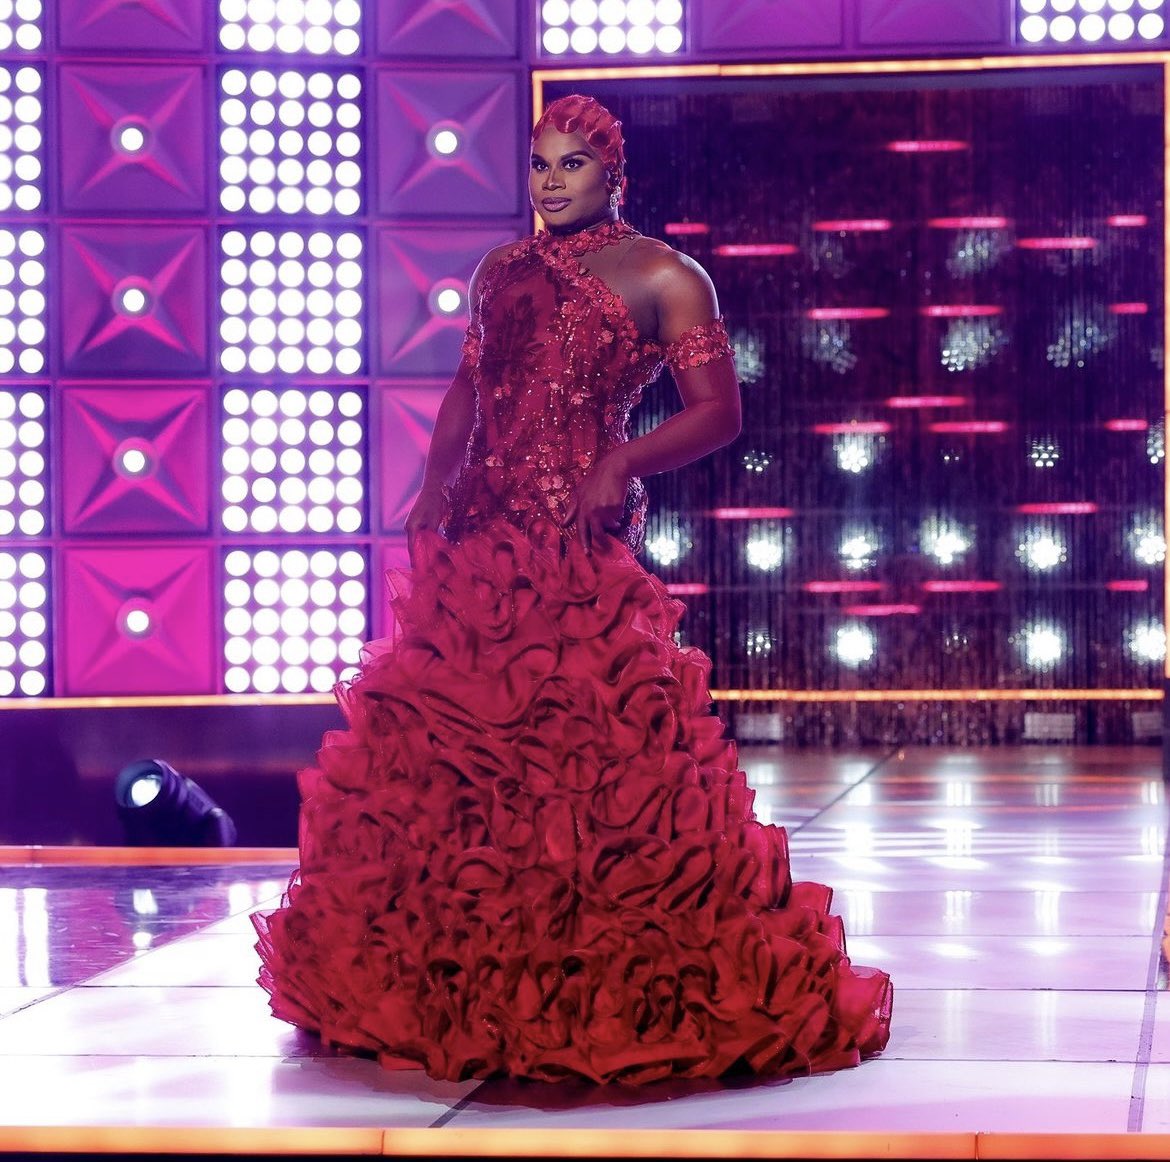 YOU ARE THE VISUALS!

Baby we made it! 🏁 The grand finale of #AllStars8 is now streaming on @paramountplus! 👑